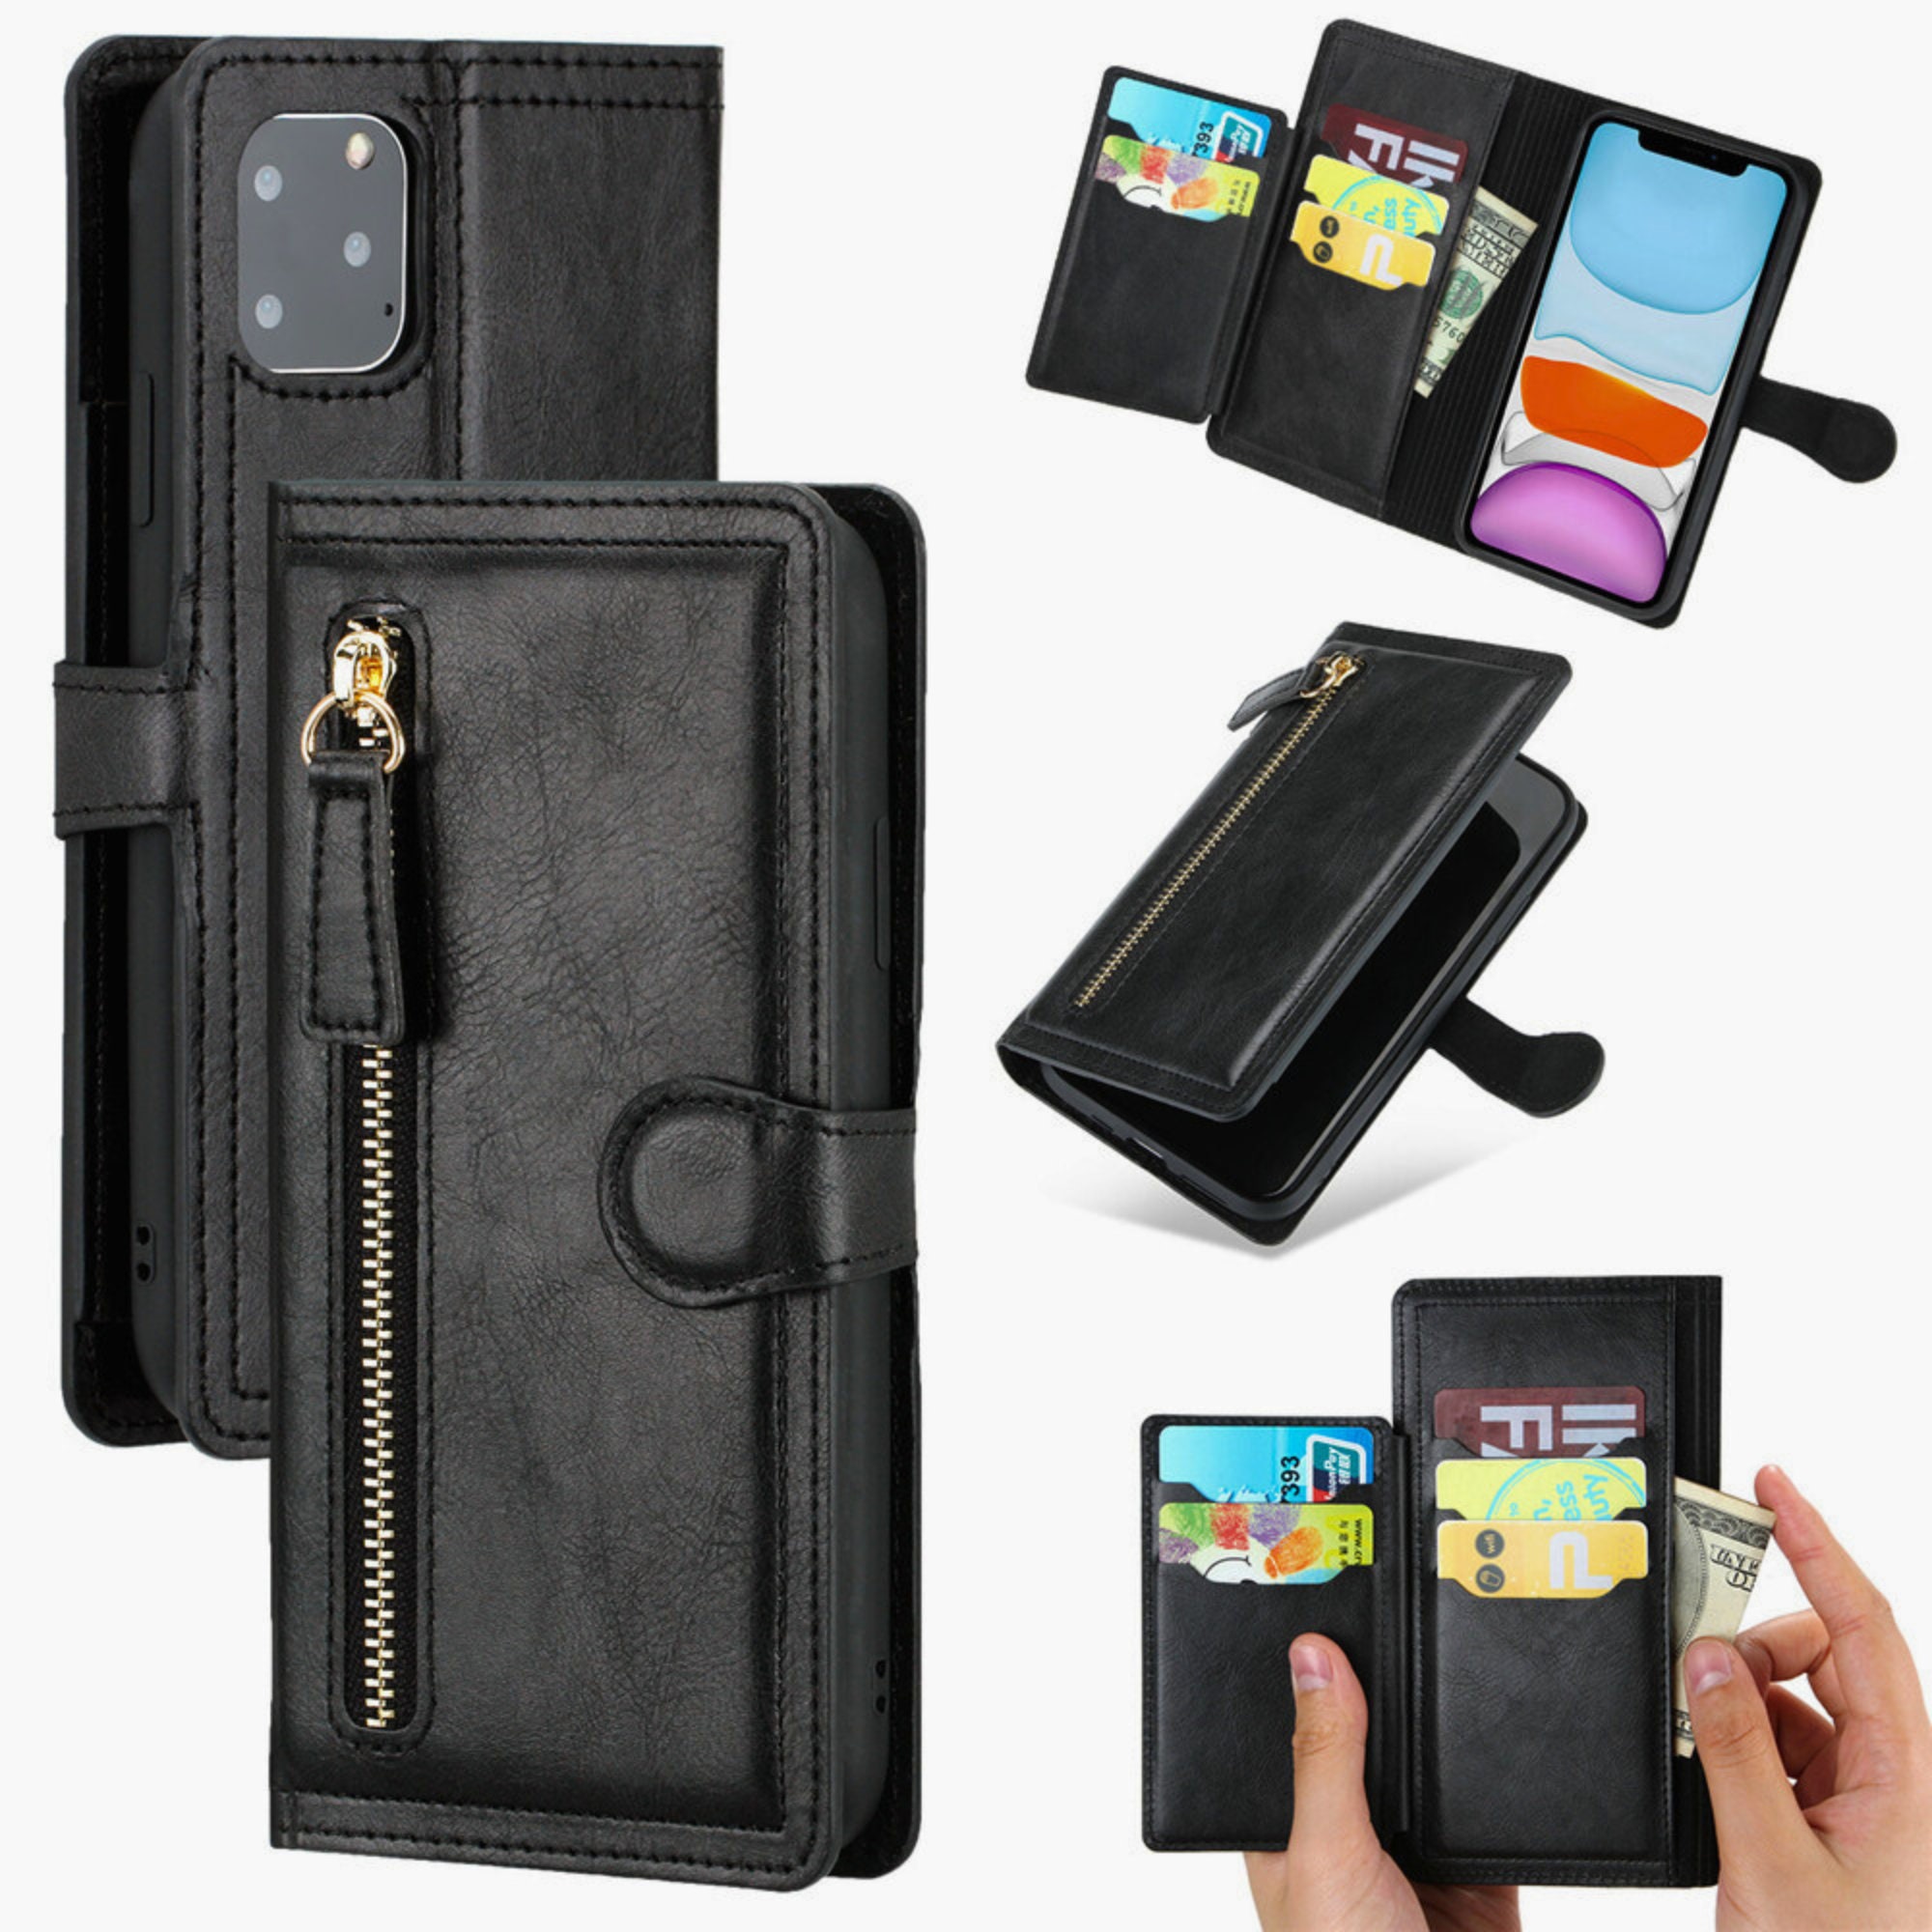 Leather iPhone Wallet Case, Zipper Flip Case Stand Cover With Card ...